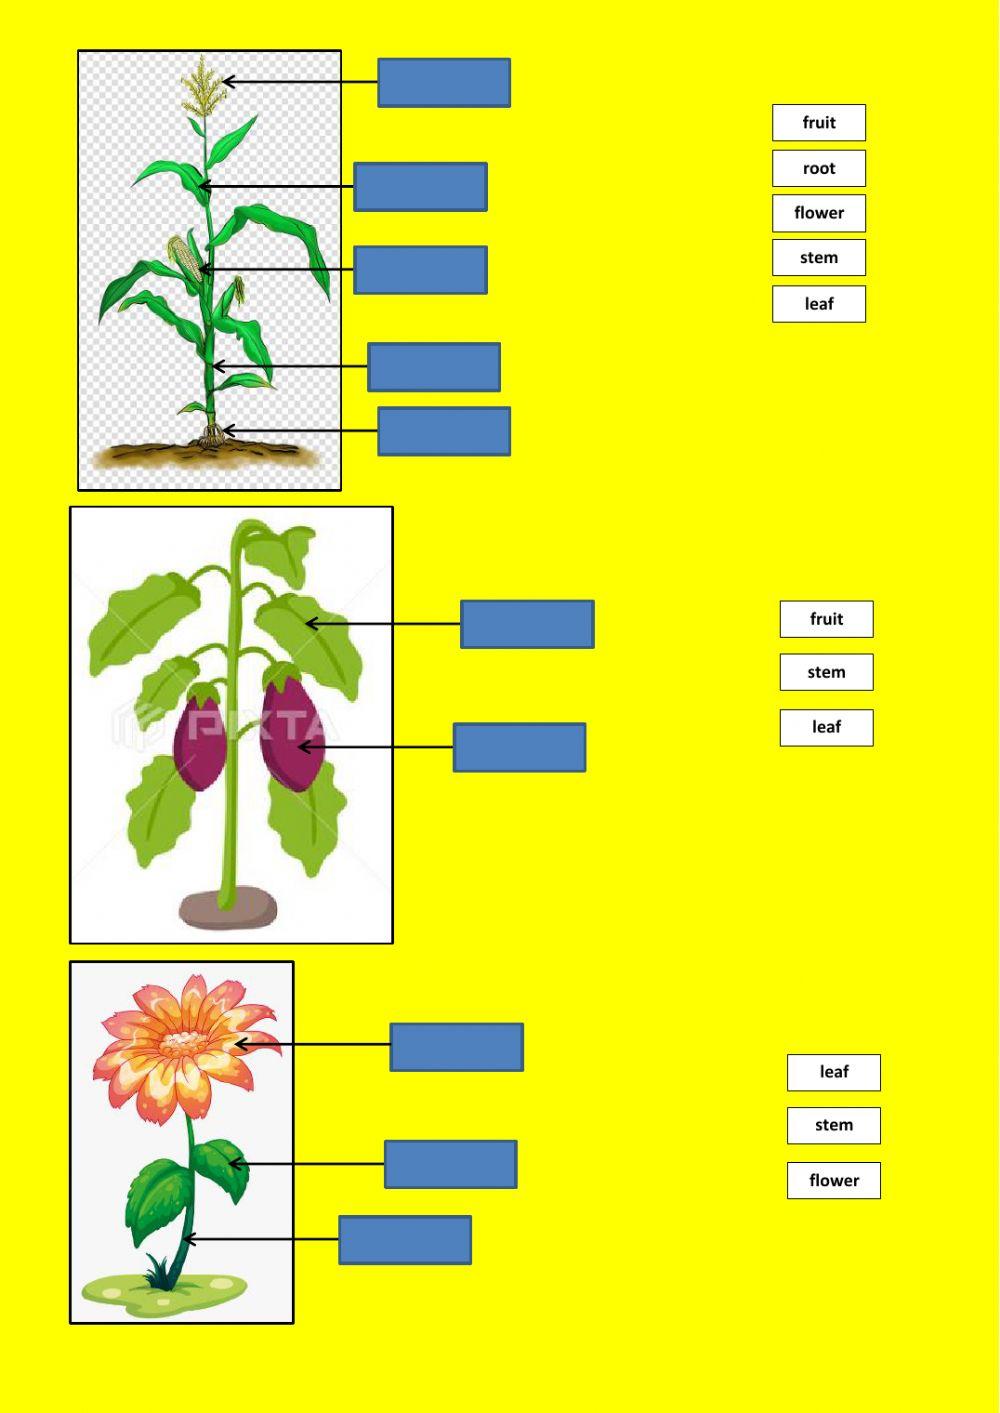 Know parts of plants